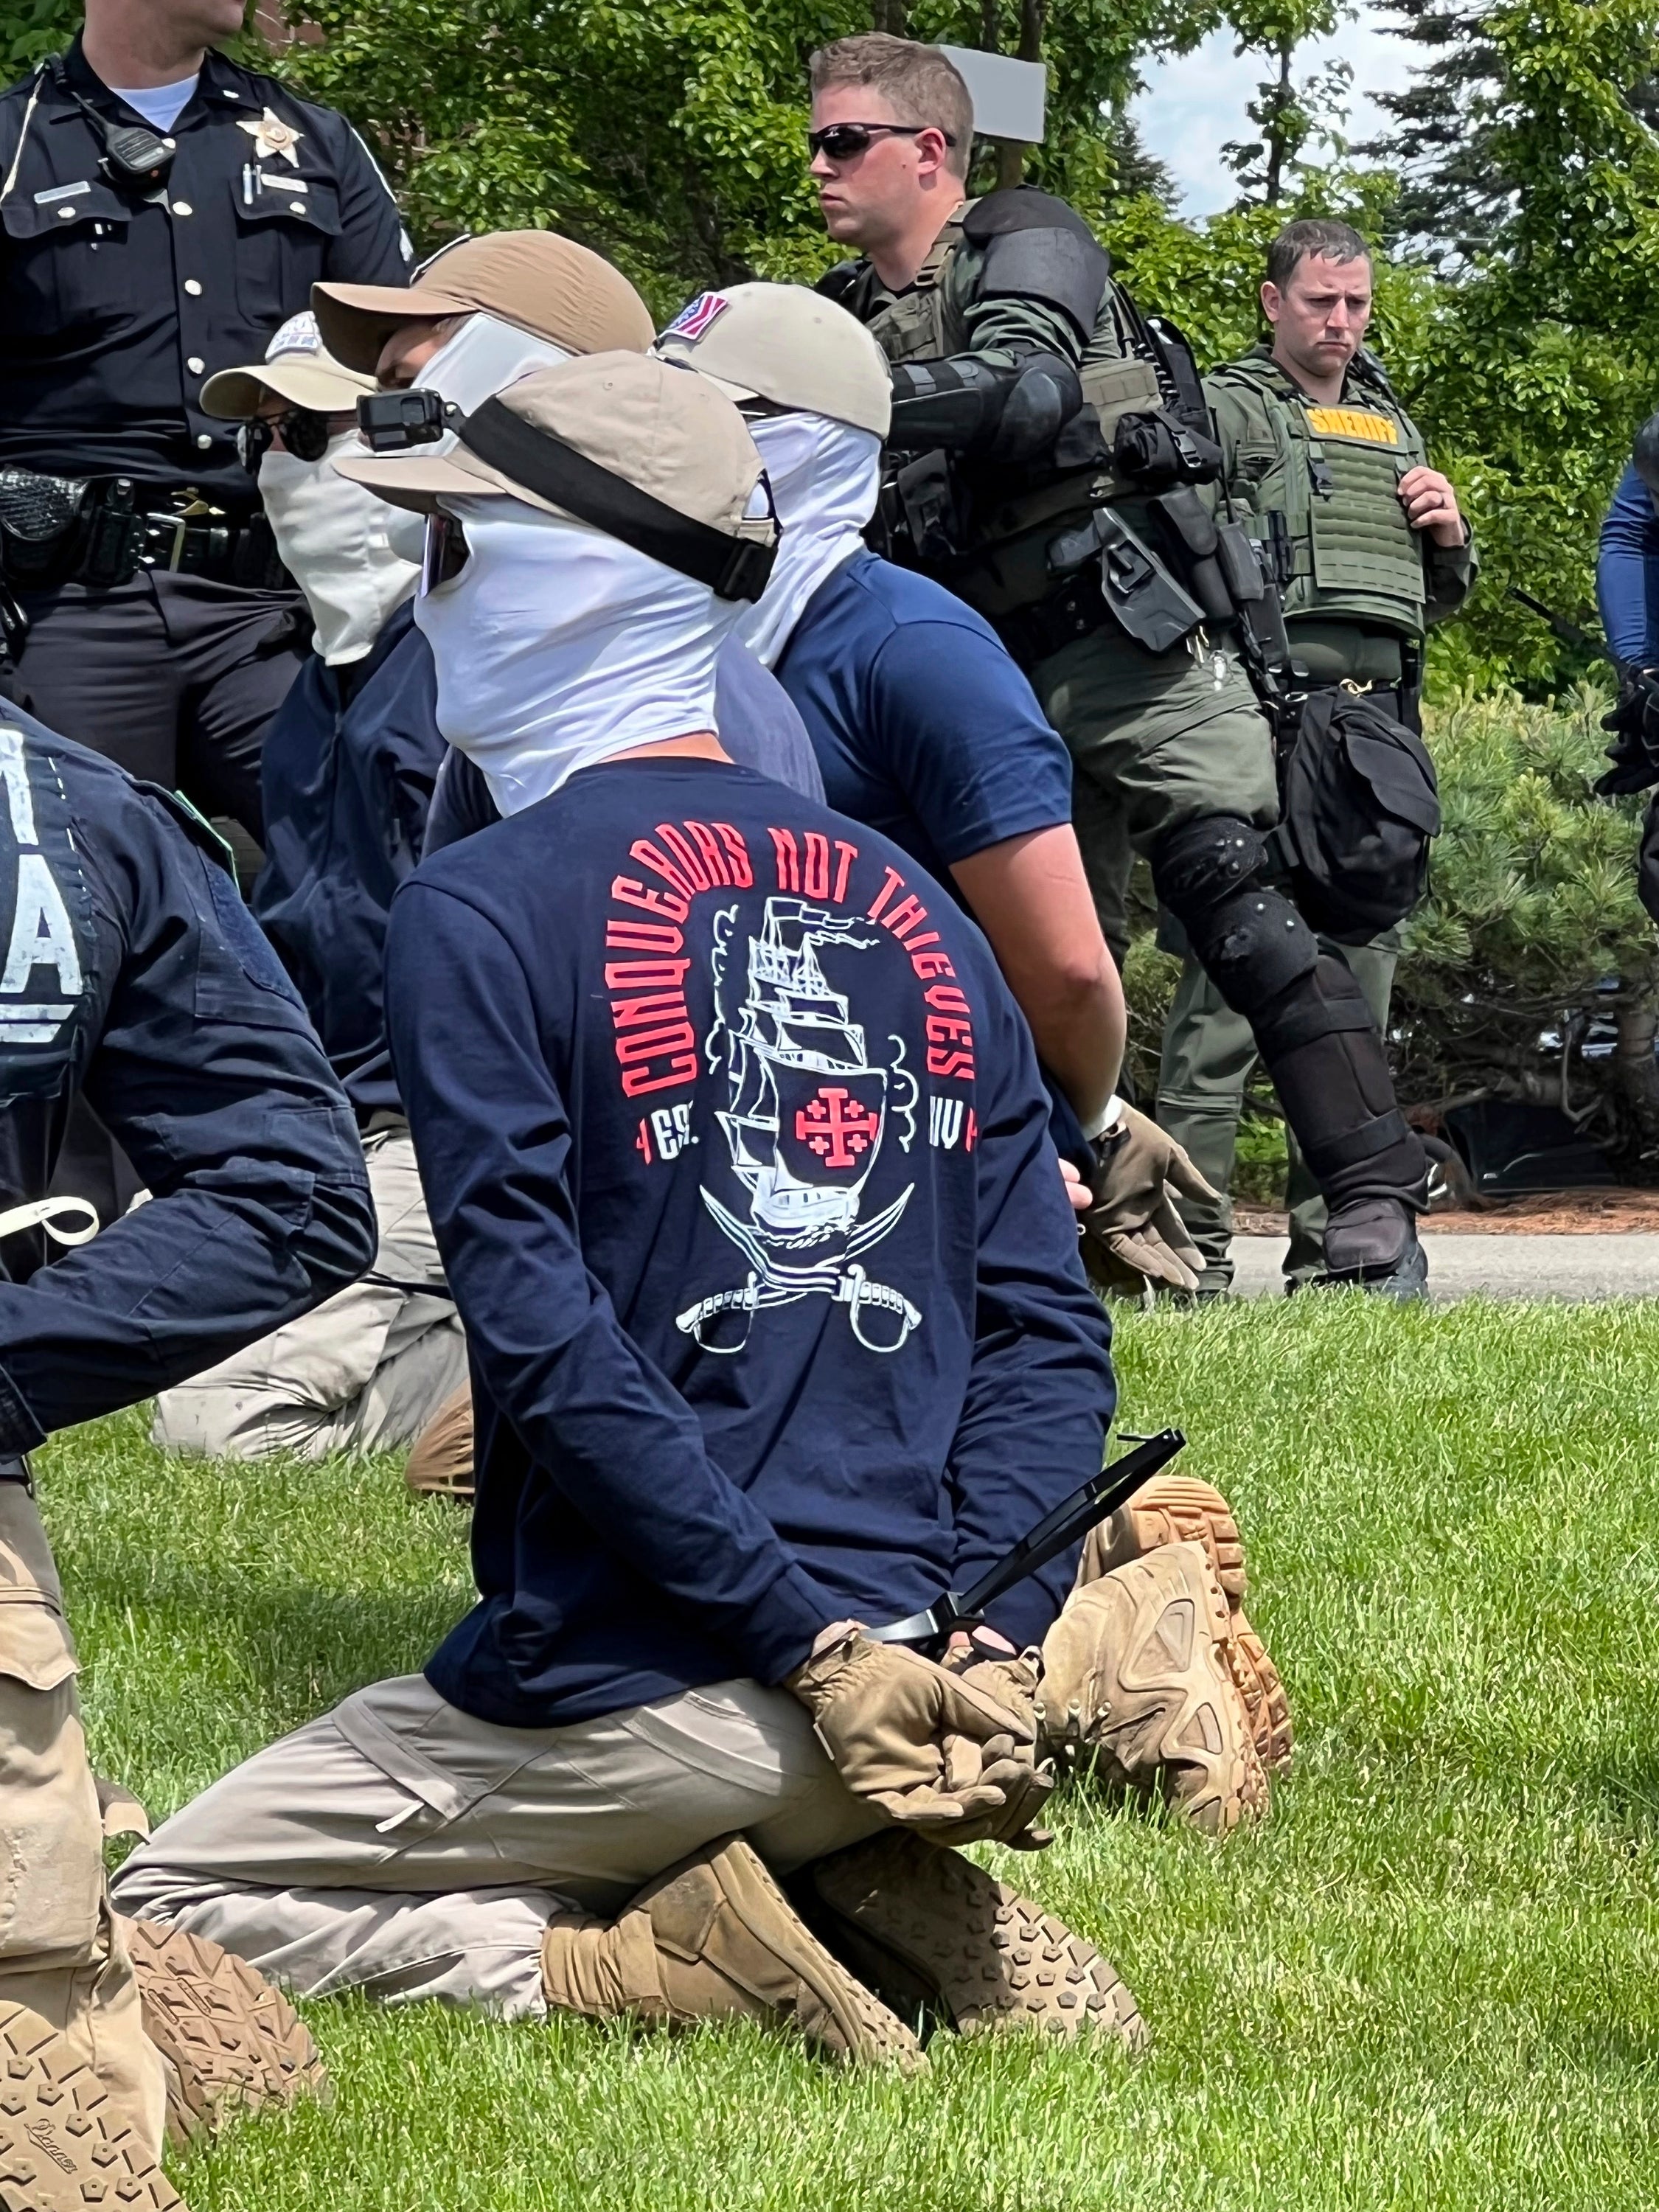 A member of the Patriot Front is arrested in Idaho on Saturday